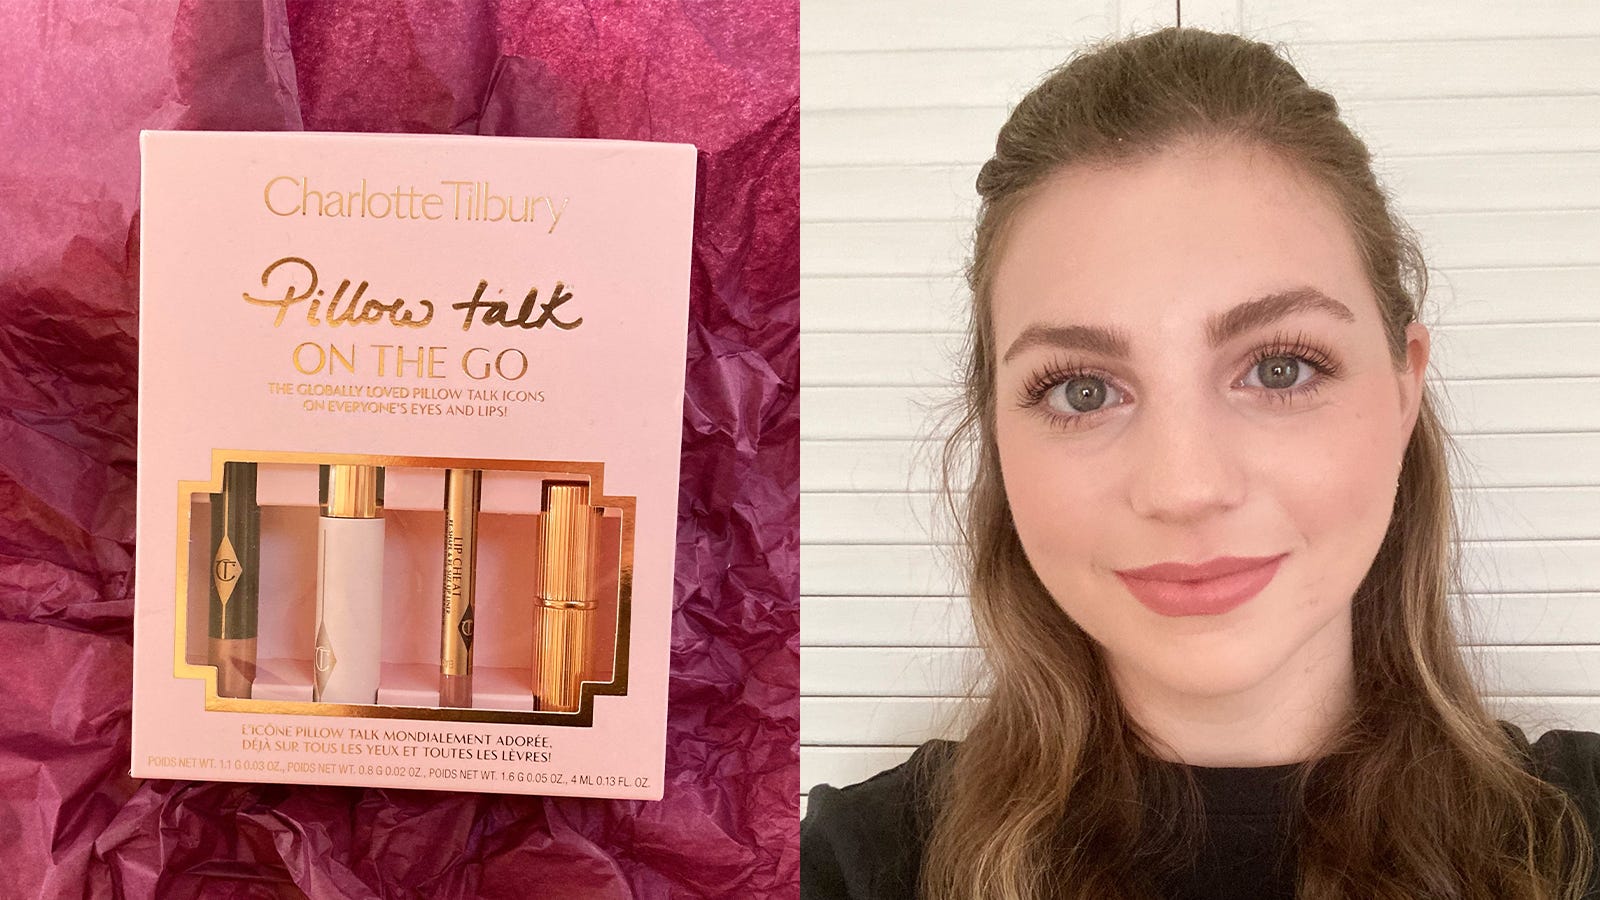 Charlotte Tilbury gift sets keep selling out—but this amazing one is still in stock